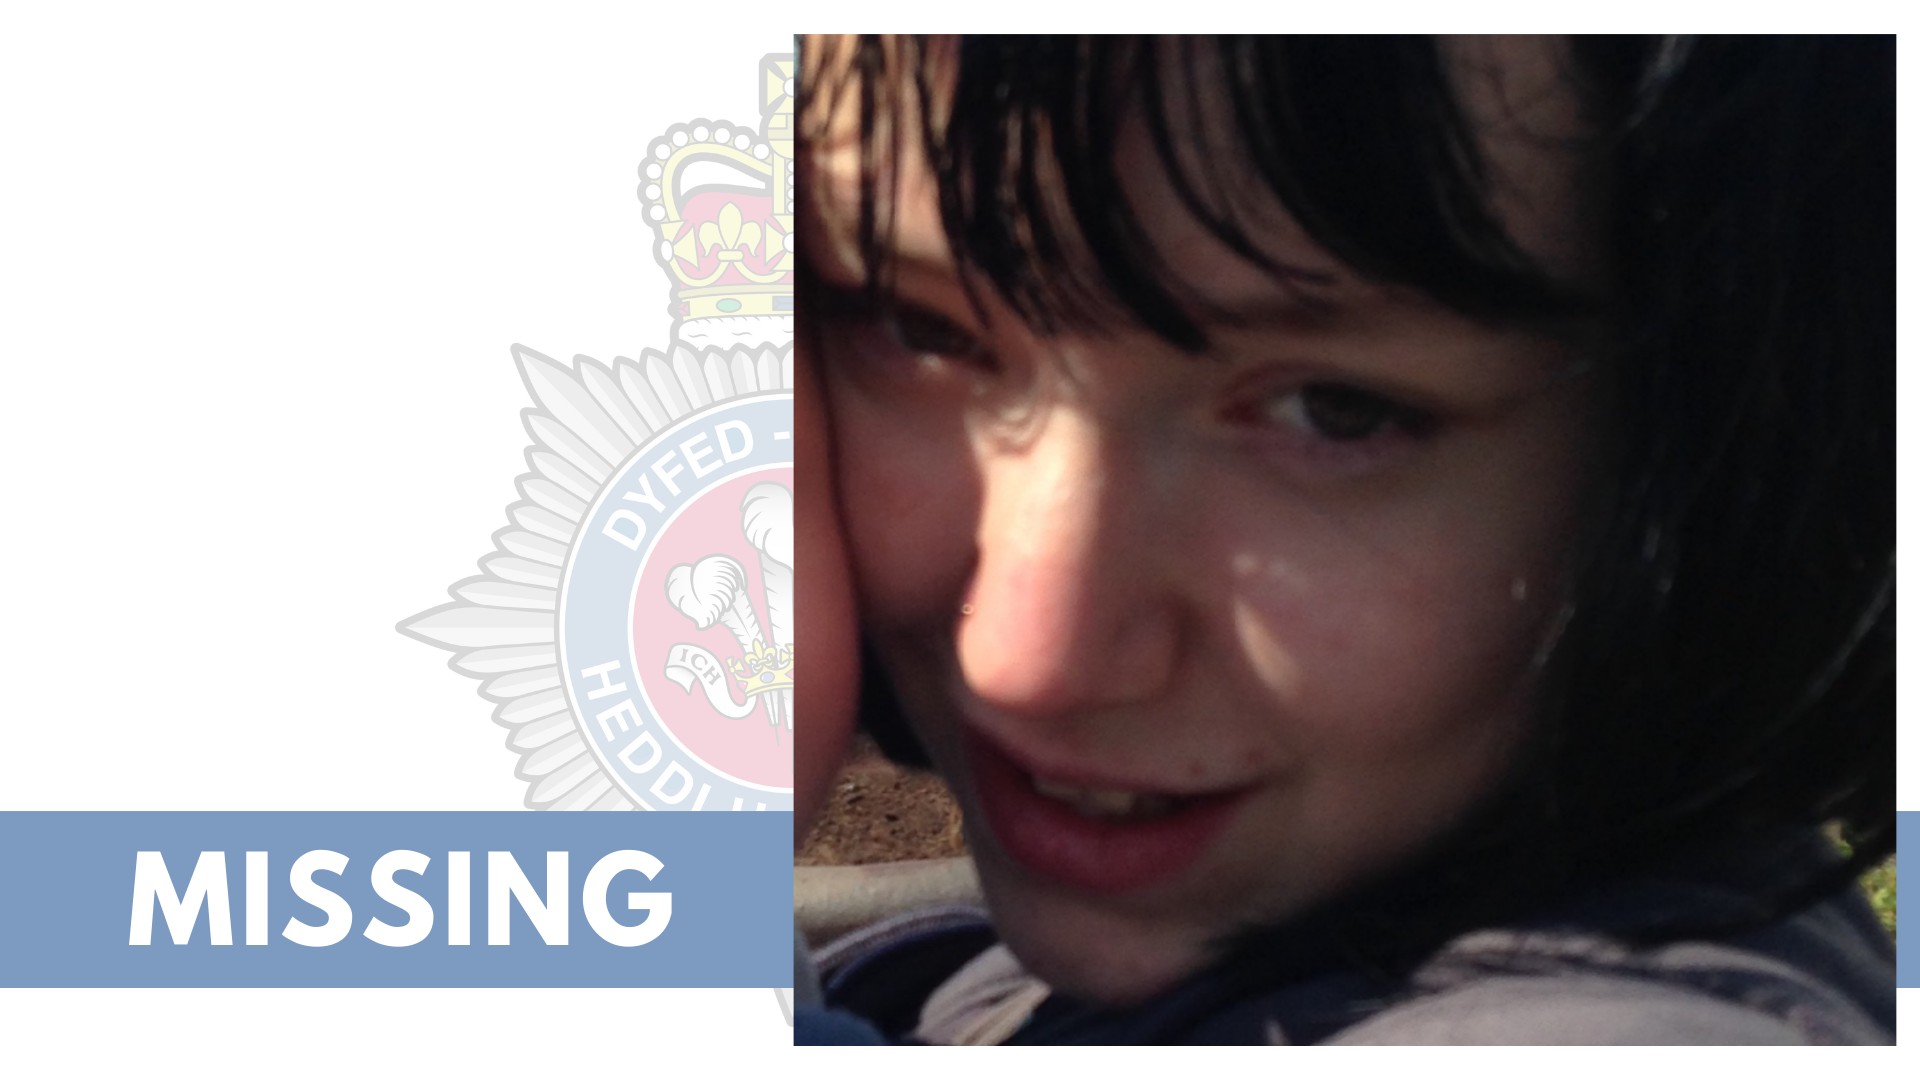 NEWS | Police launch an appeal to help find a missing 16-year-old girl who hasn’t been seen since Friday